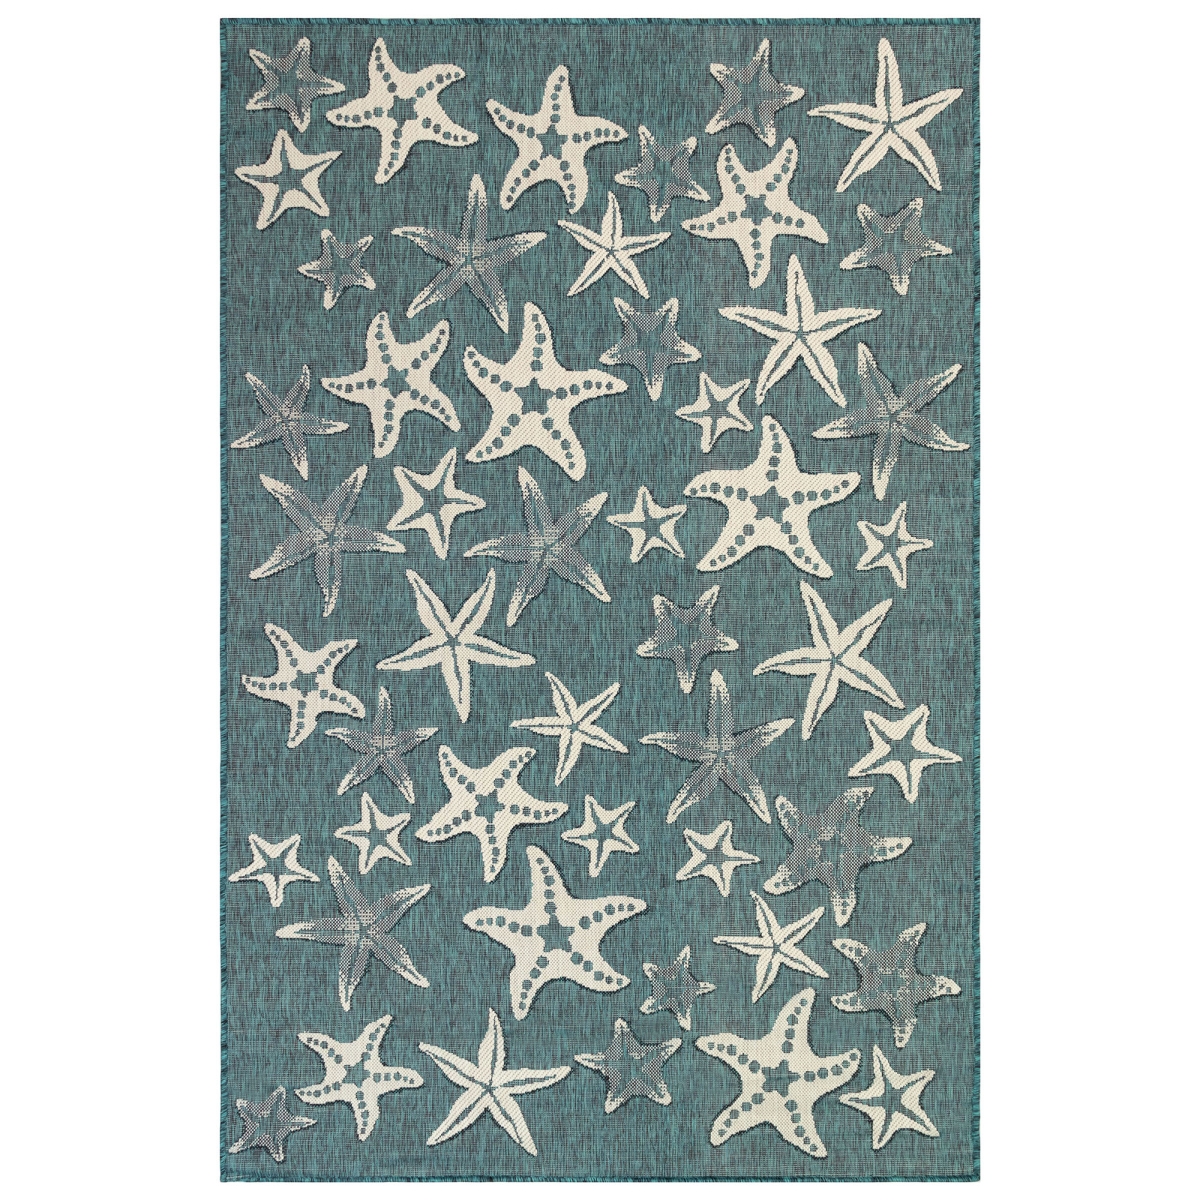 Cre58841594 Liora Manne Carmel Starfish Indoor & Outdoor Rug, Teal - 4 Ft. 10 In. X 7 Ft. 6 In.